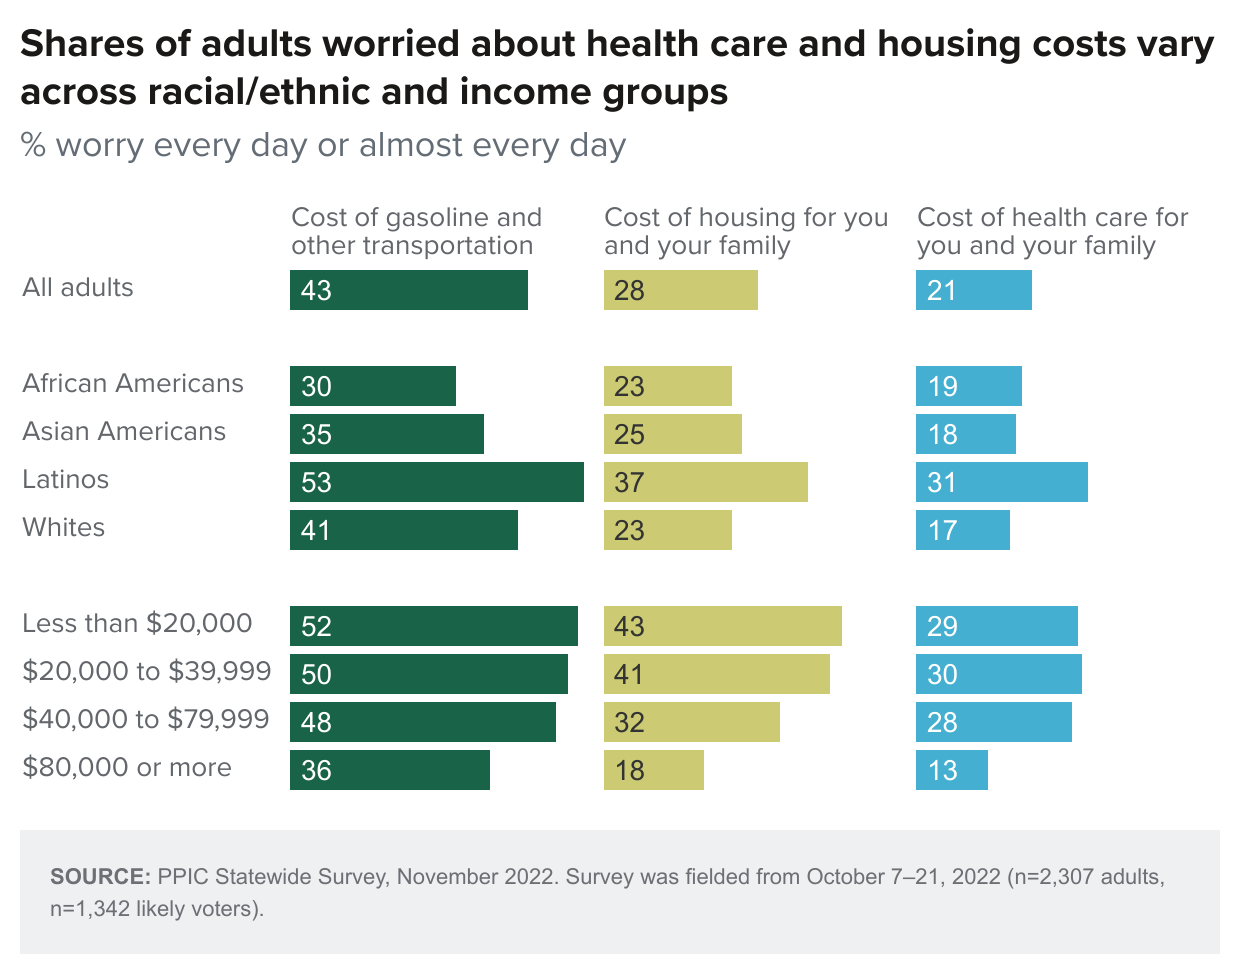 figure - Shares of adults worried about health care and housing costs vary across racial/ethnic and income groups